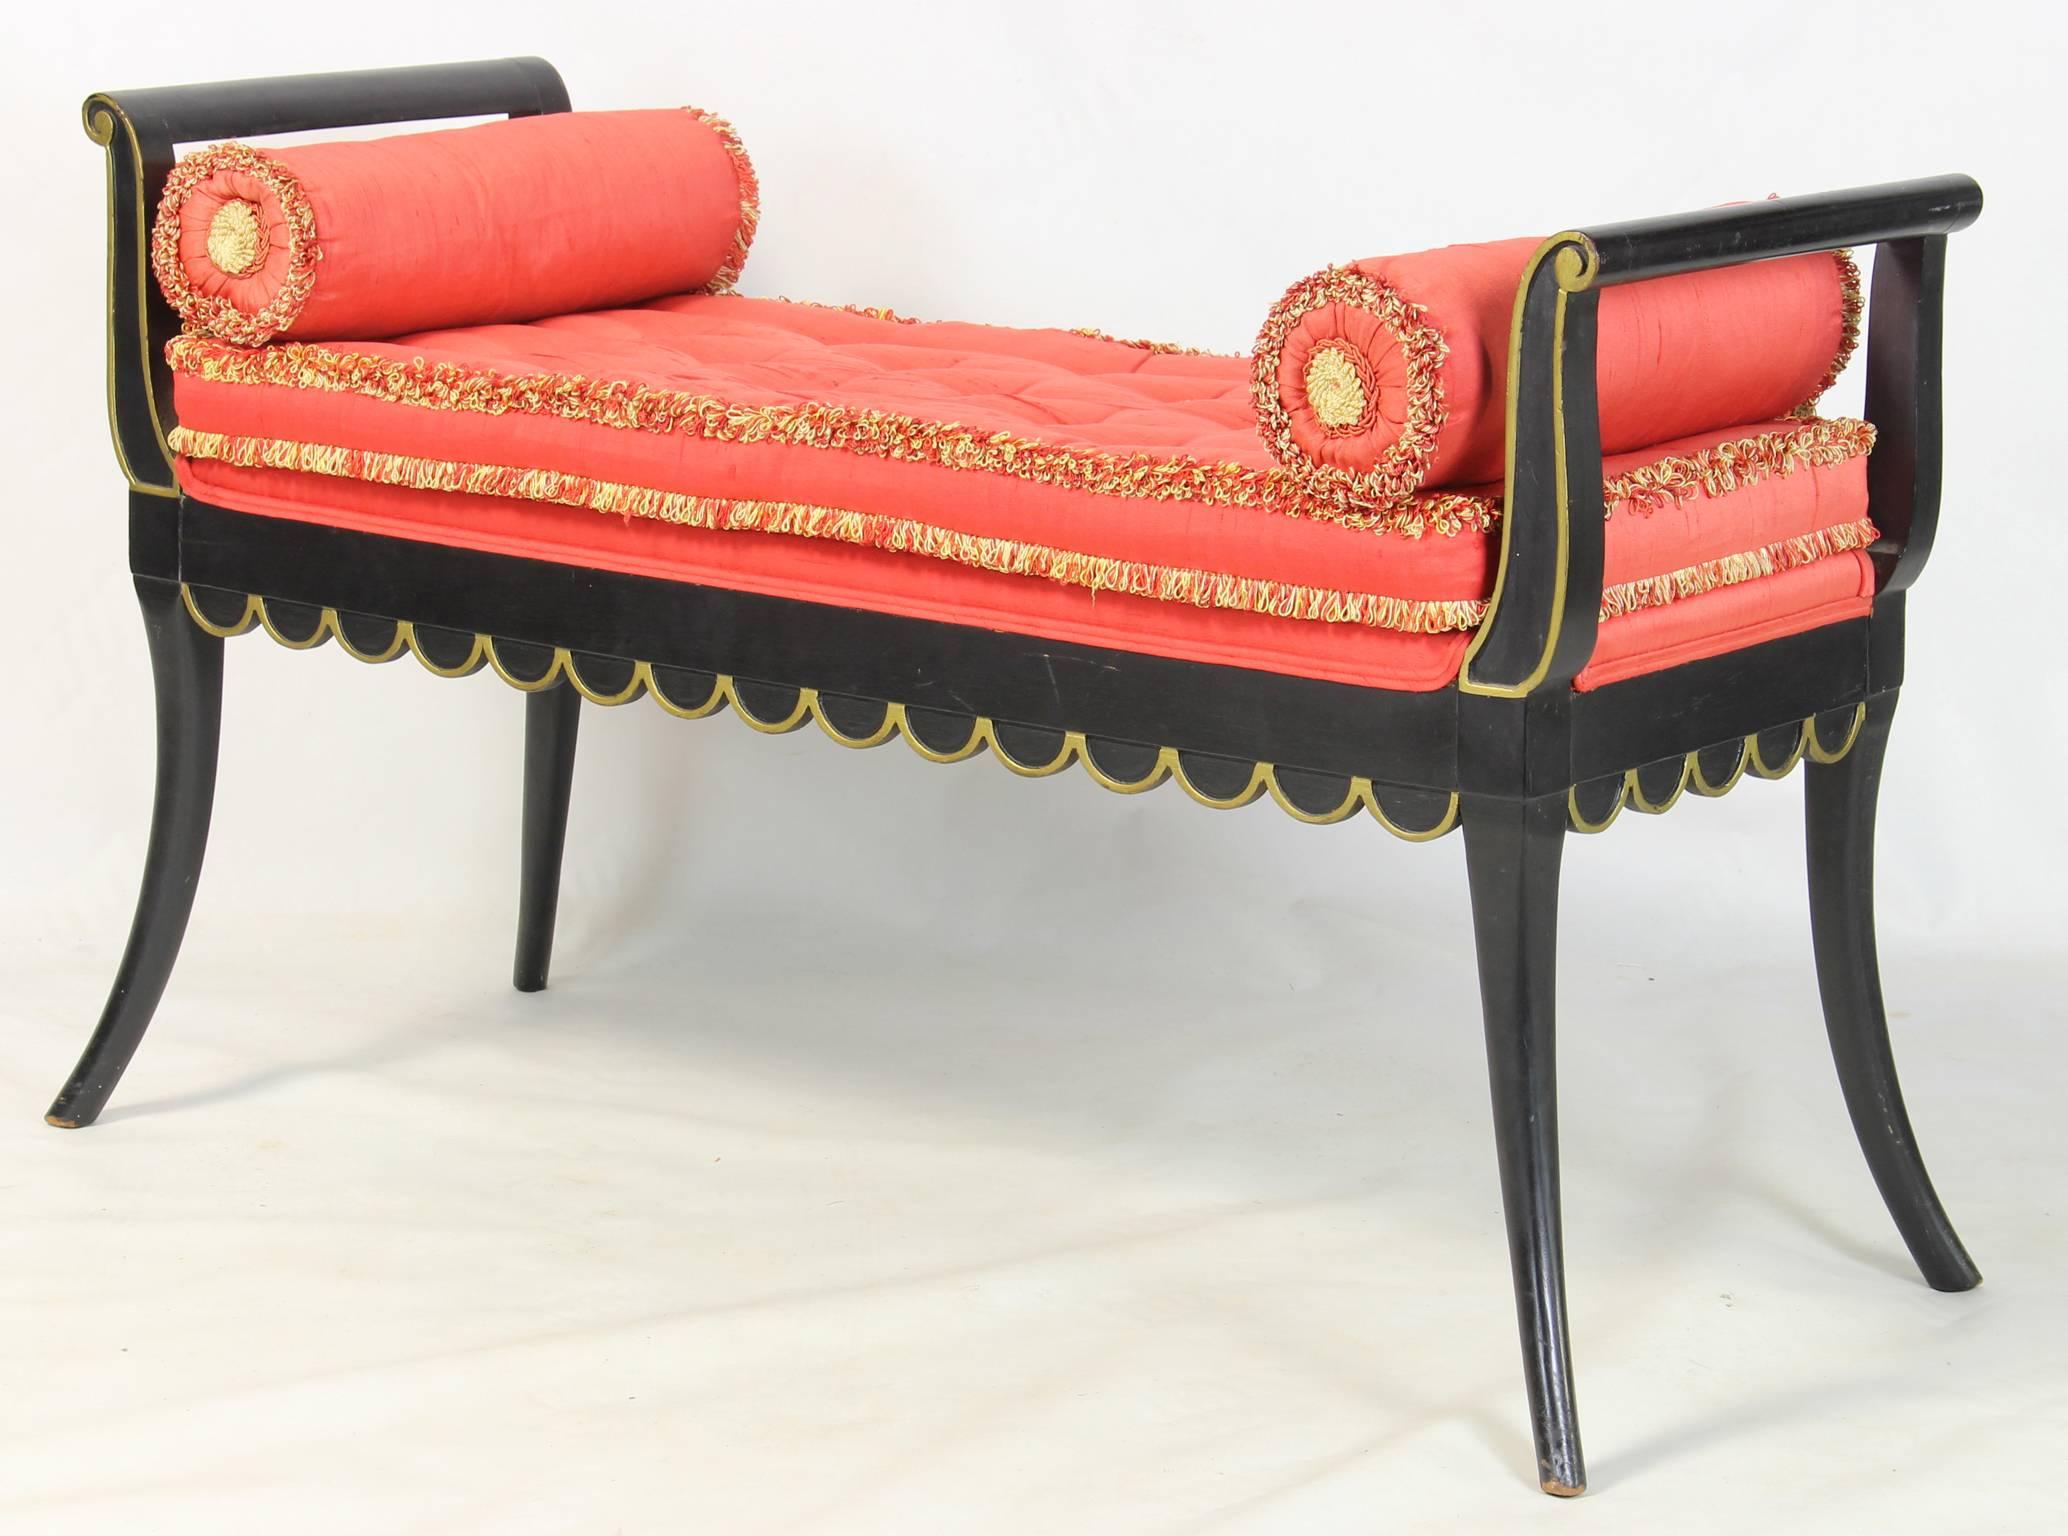 A charming ebonized Hollywood Regency window seat or bench with delicate flared legs and scalloped skirt and traces of old gold paint.  